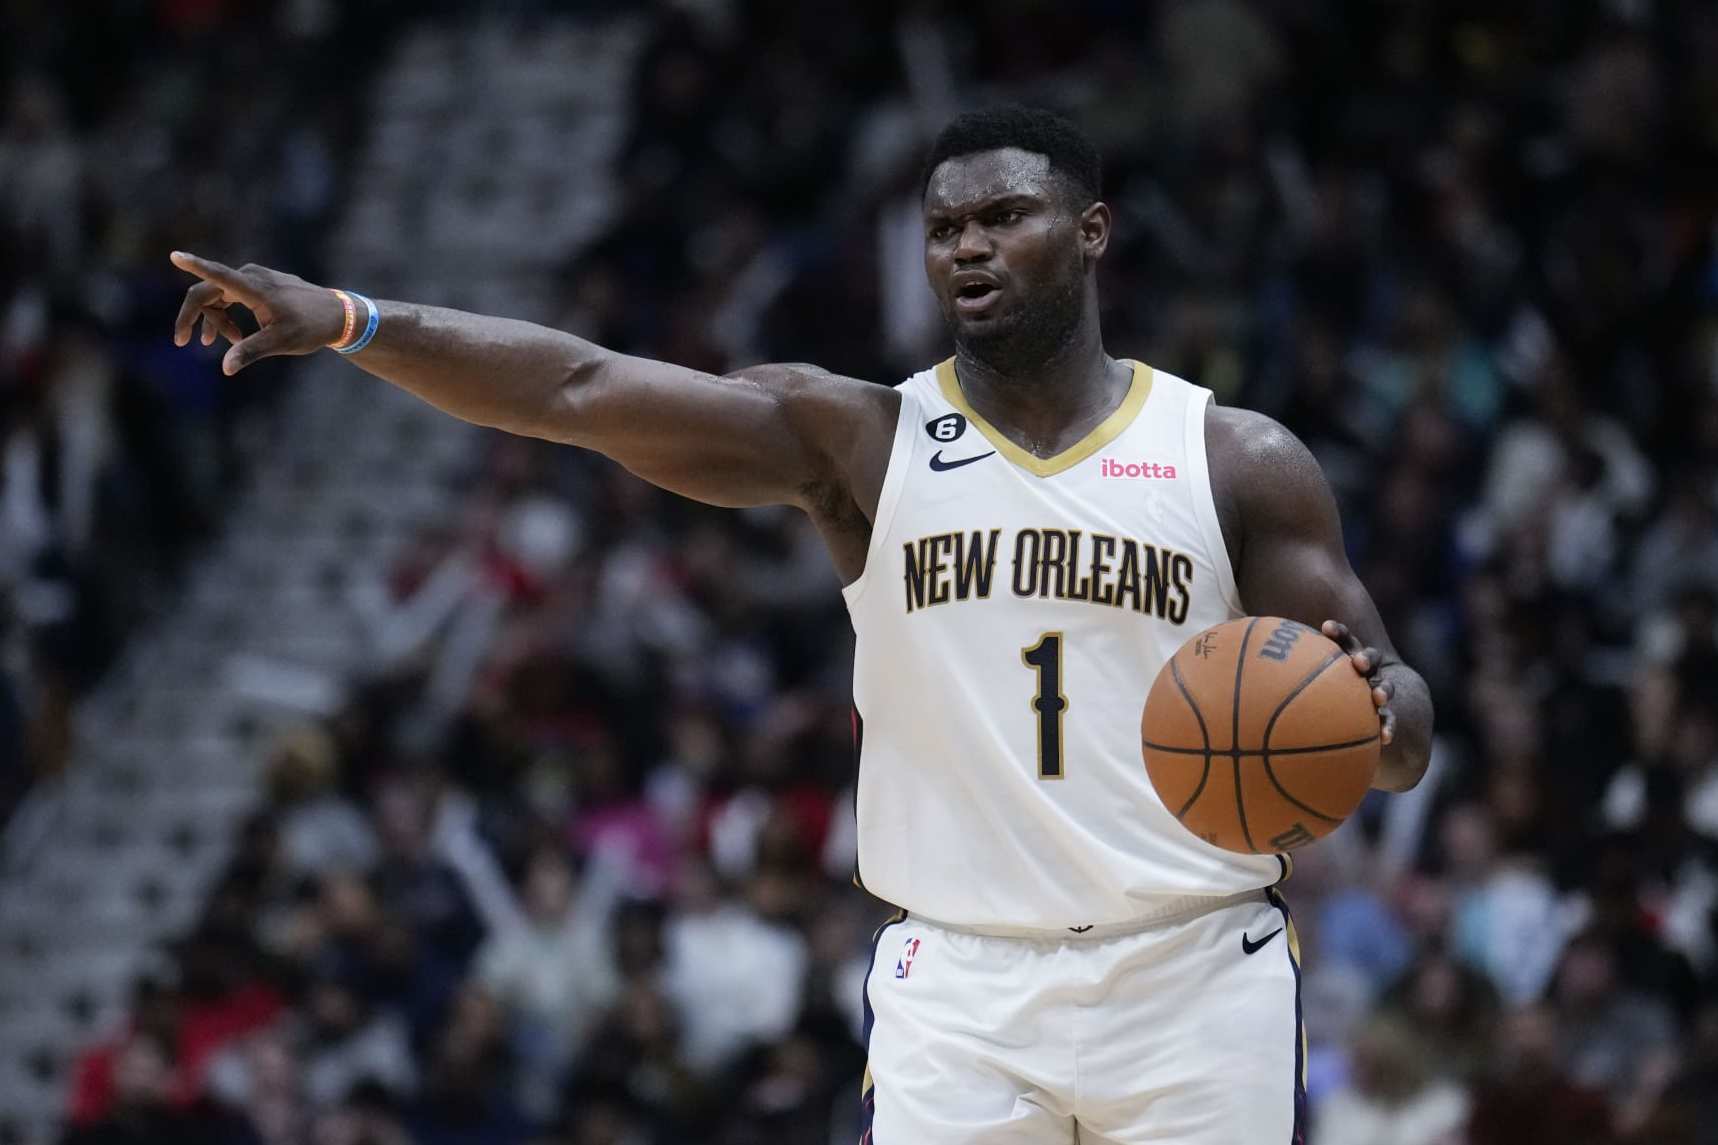 Zion Williamson closes out Pelicans win over Suns with 360 windmill dunk